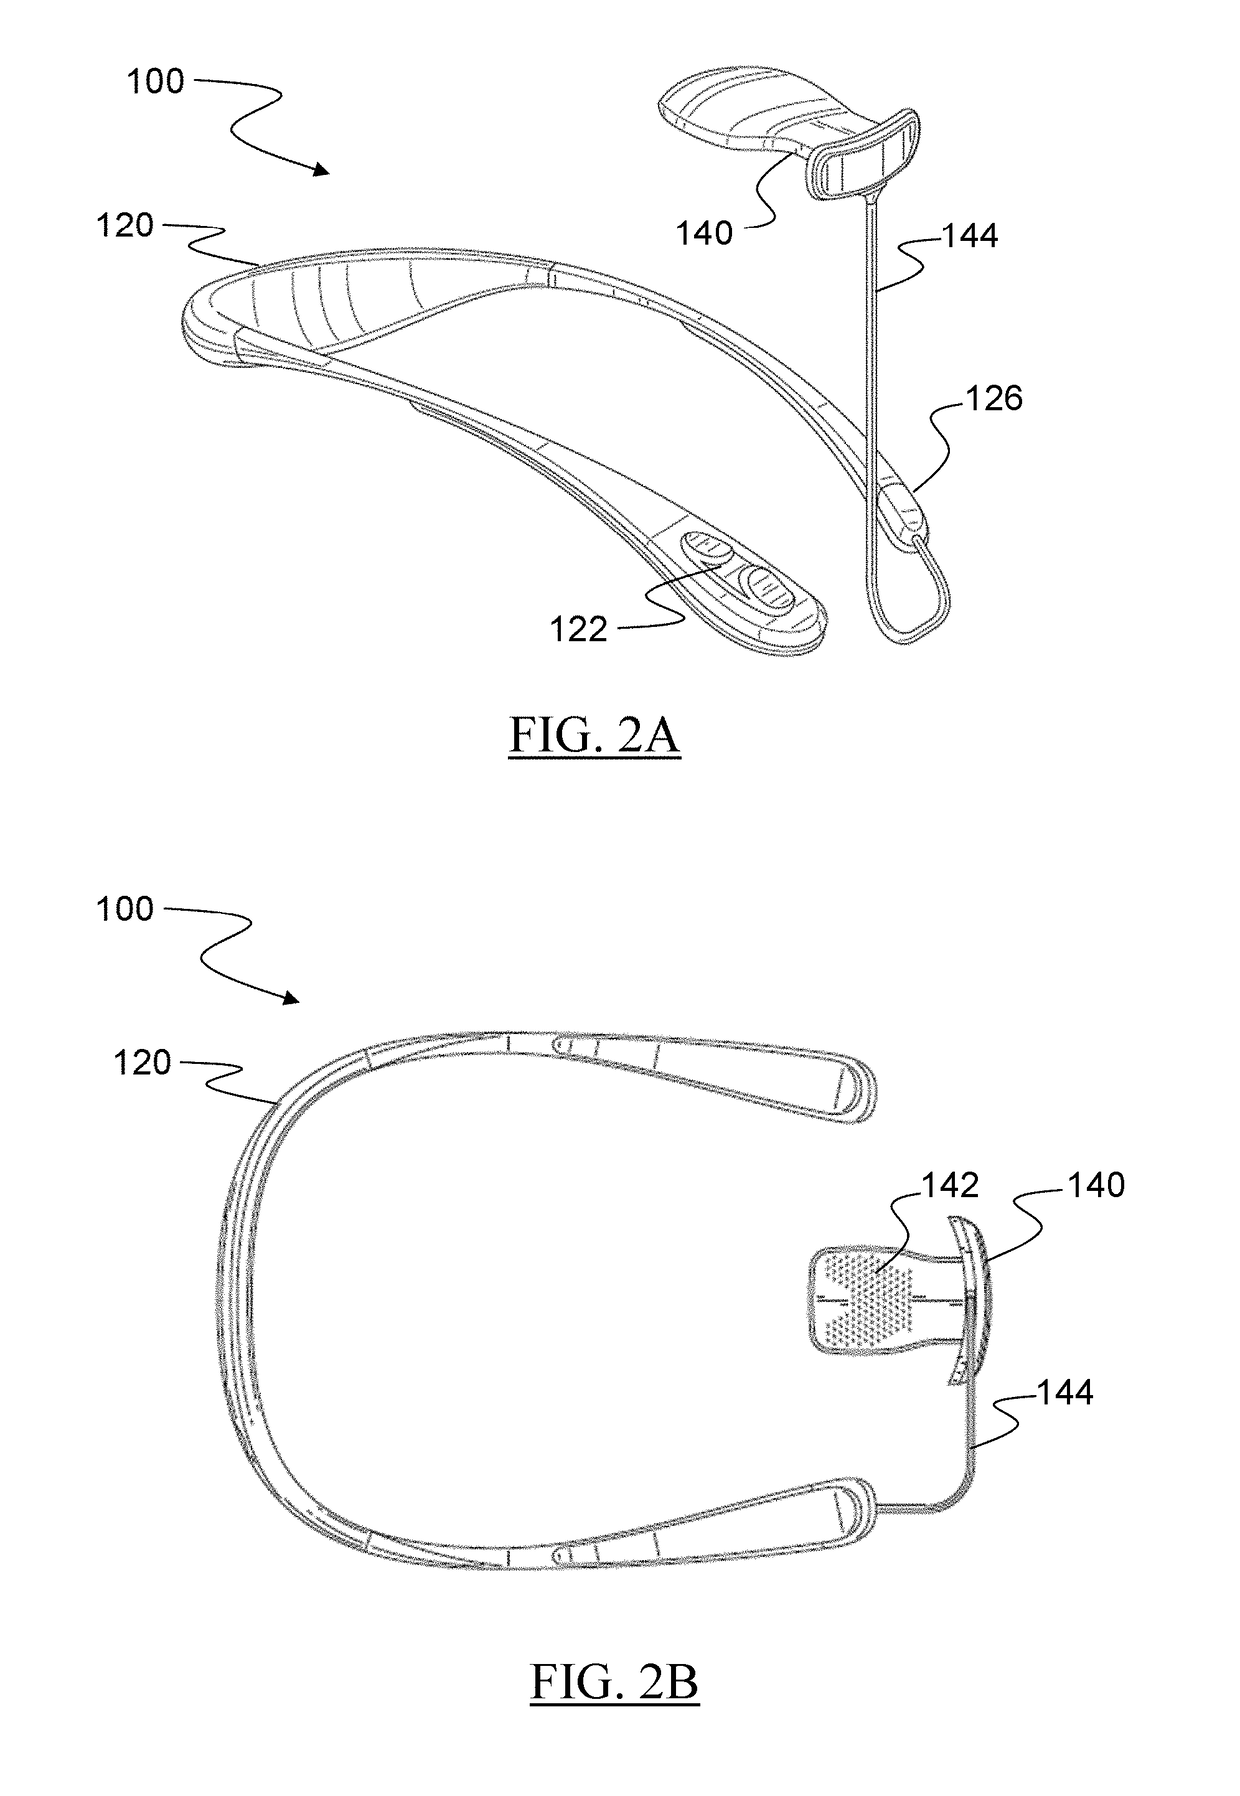 Systems and methods for providing non-invasive neurorehabilitation of a patient